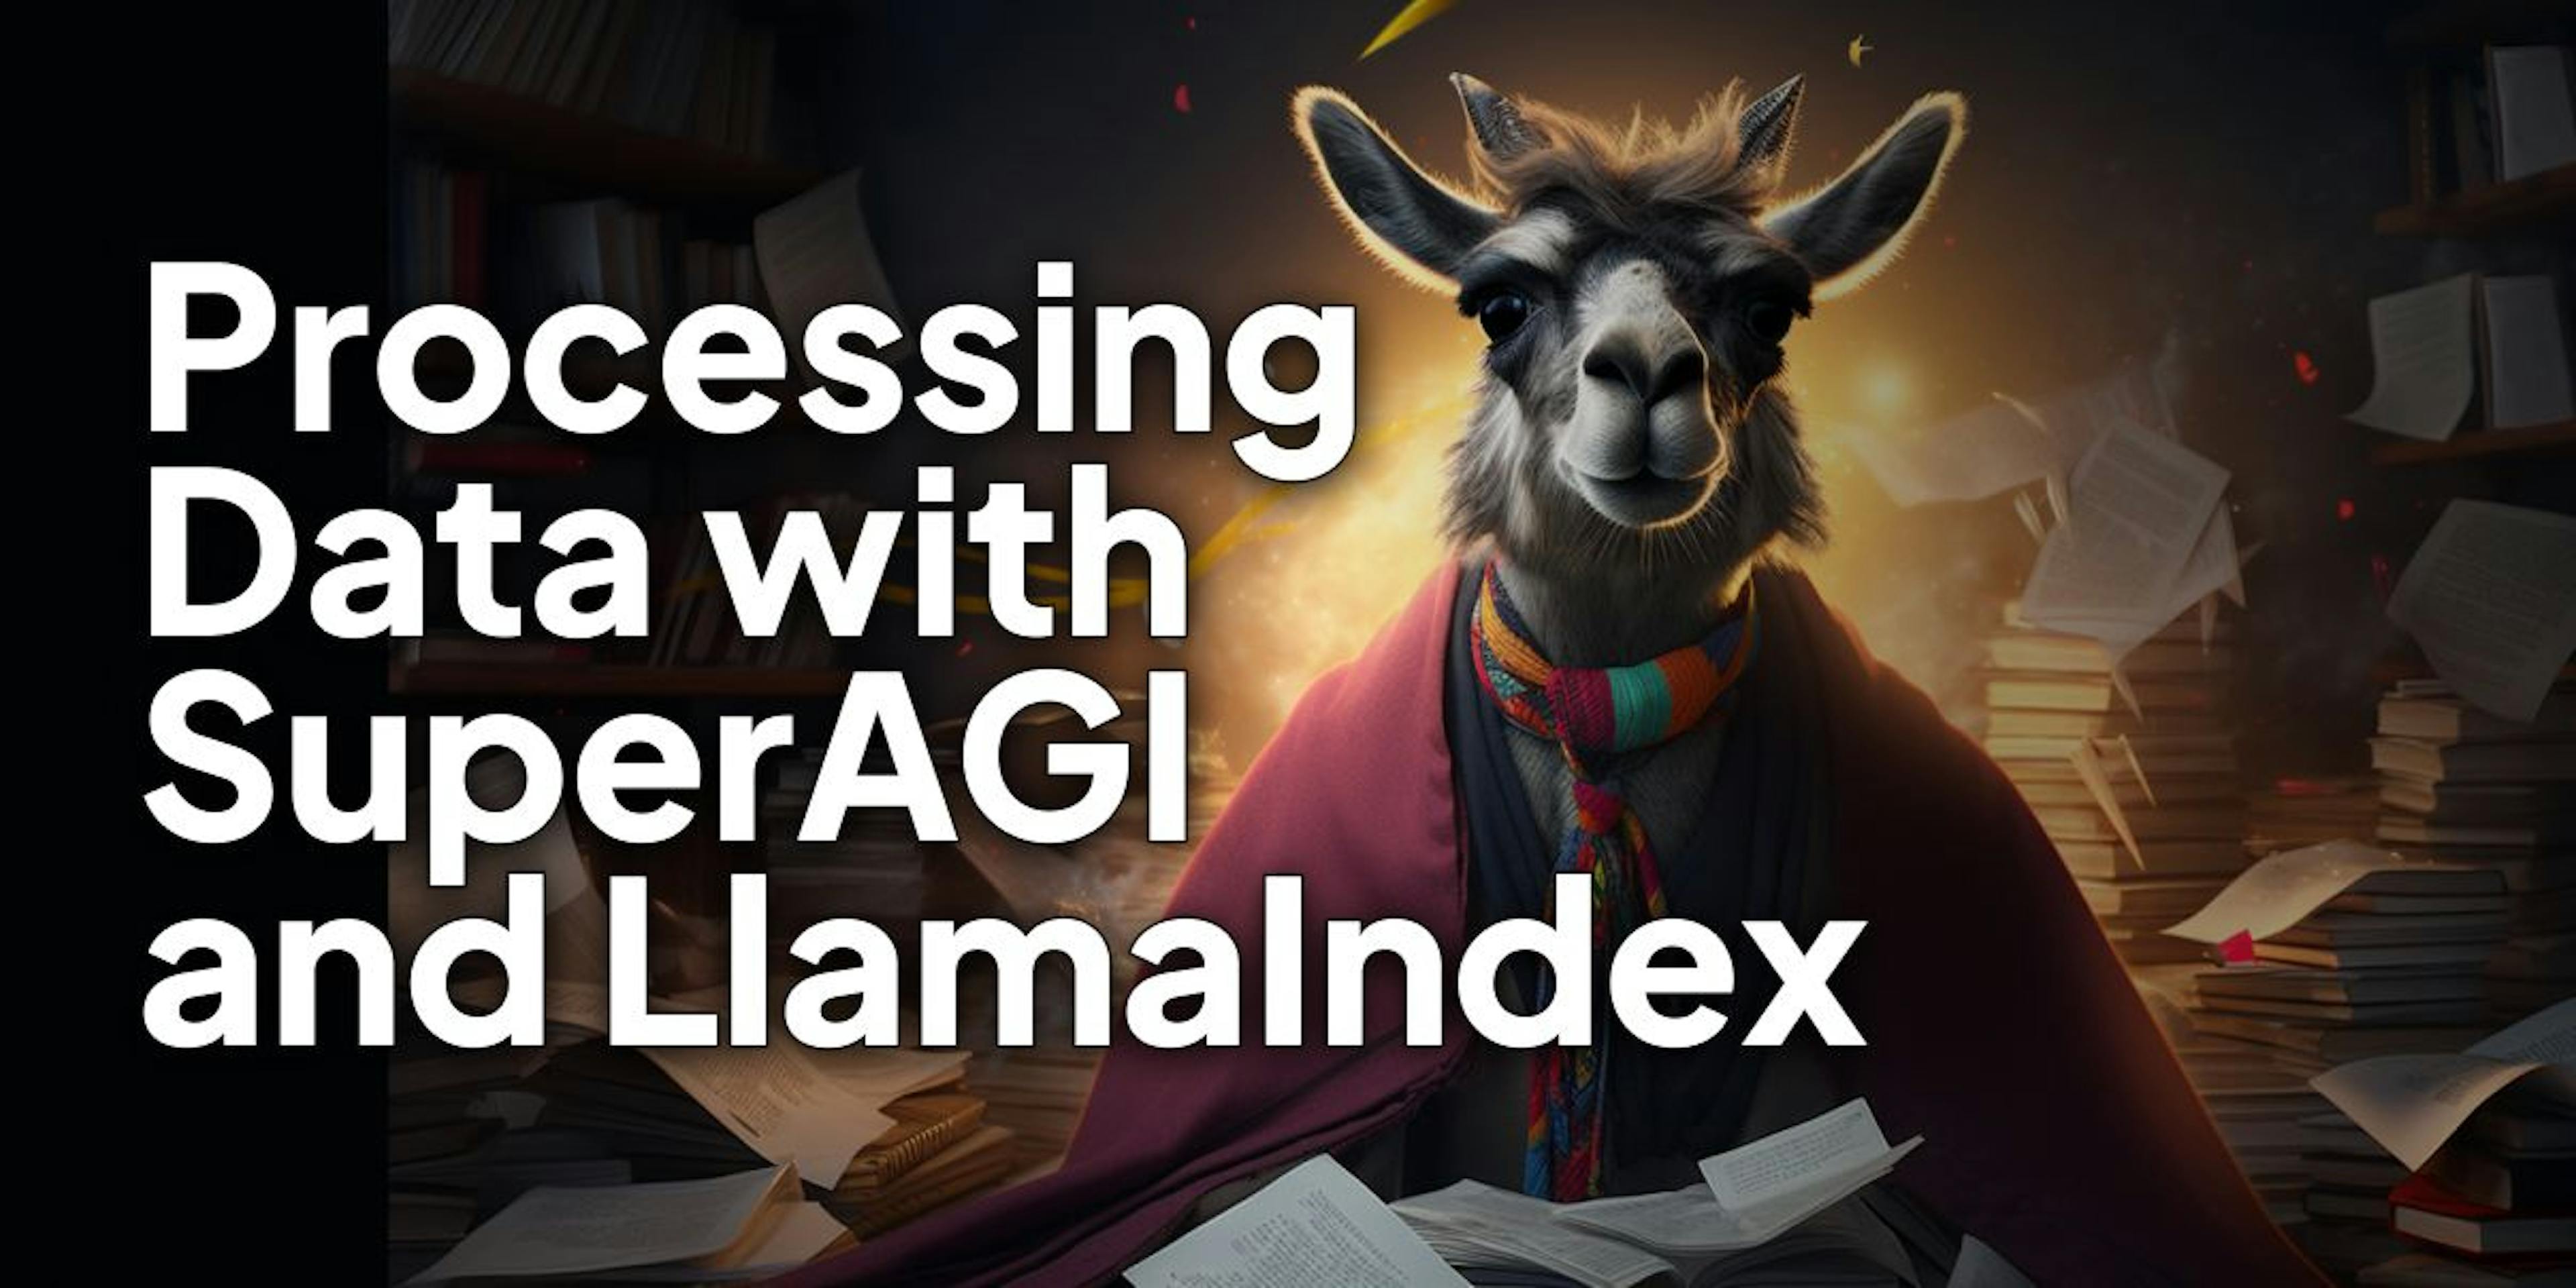 featured image - Processing Structured and Unstructured Data with SuperAGI and LlamaIndex